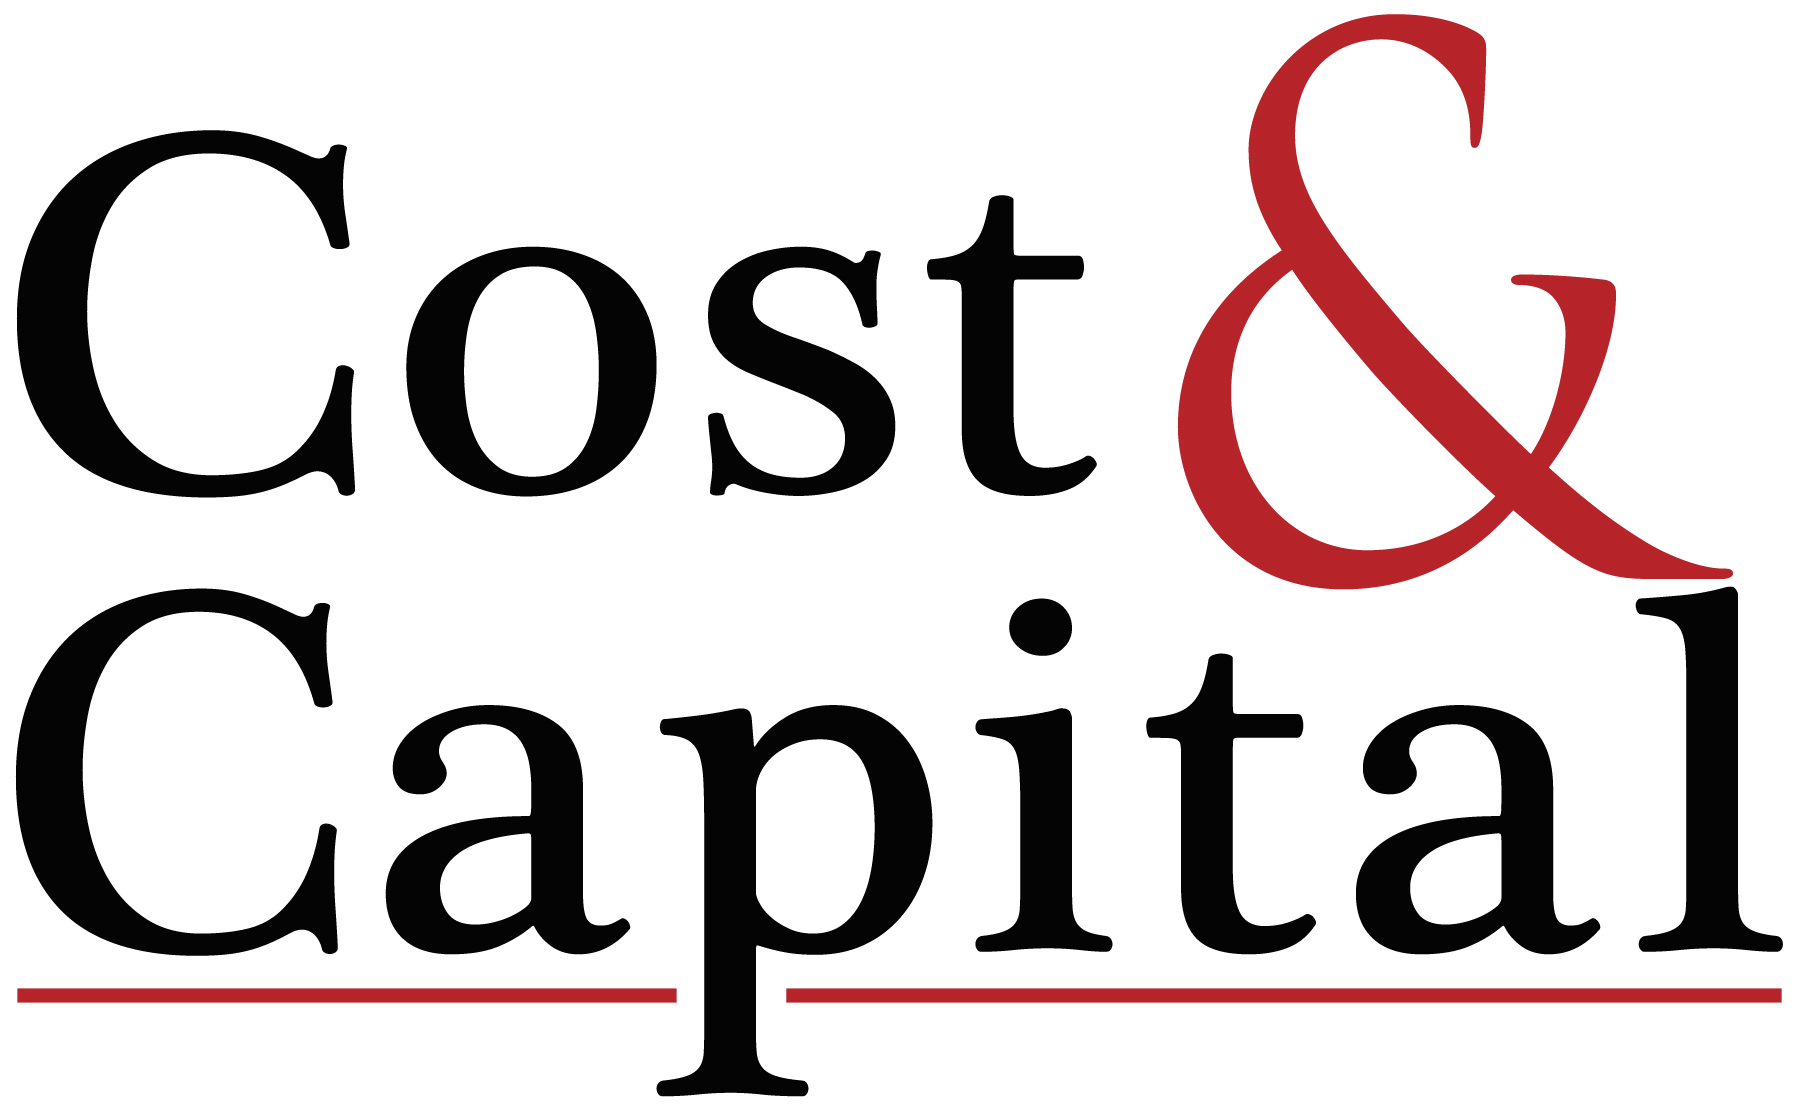 Source: https://upload.wikimedia.org/wikipedia/commons/a/a3/Cost_and_Capital_Partners_Logo.png